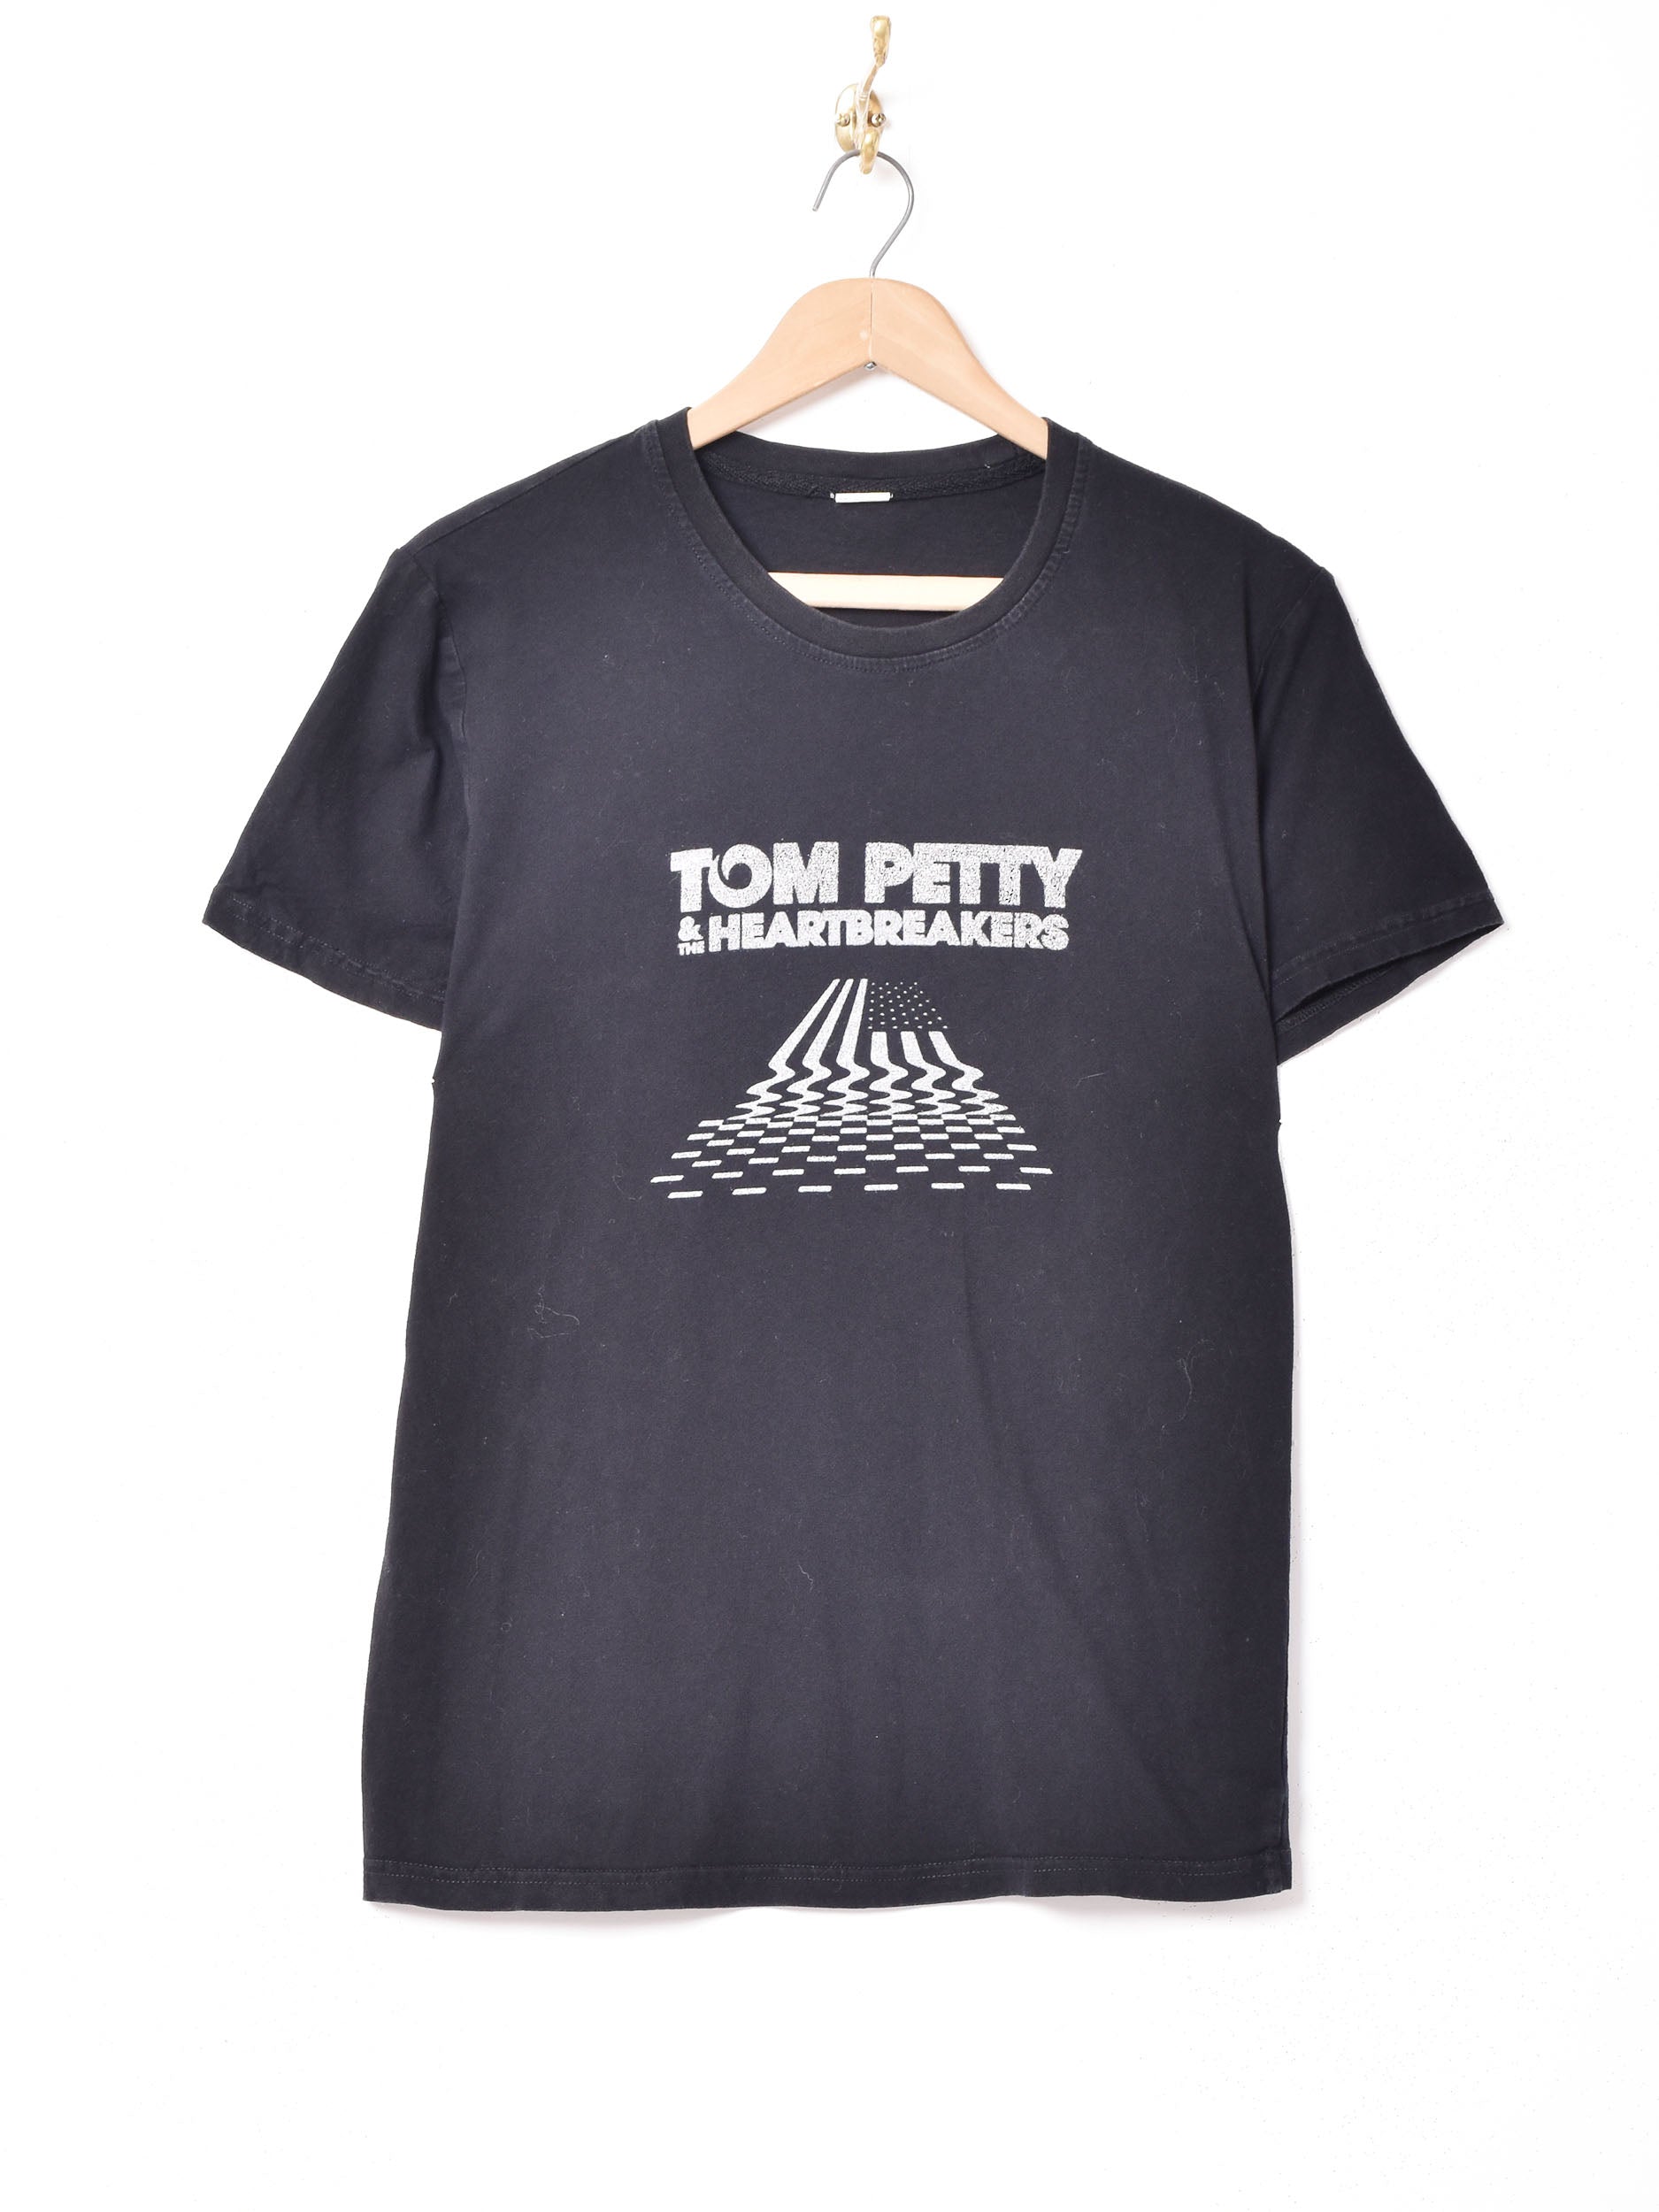 Tom petty and the Heartbreakers プリントTシャツ – 古着屋Top of the Hillのネット通販サイト